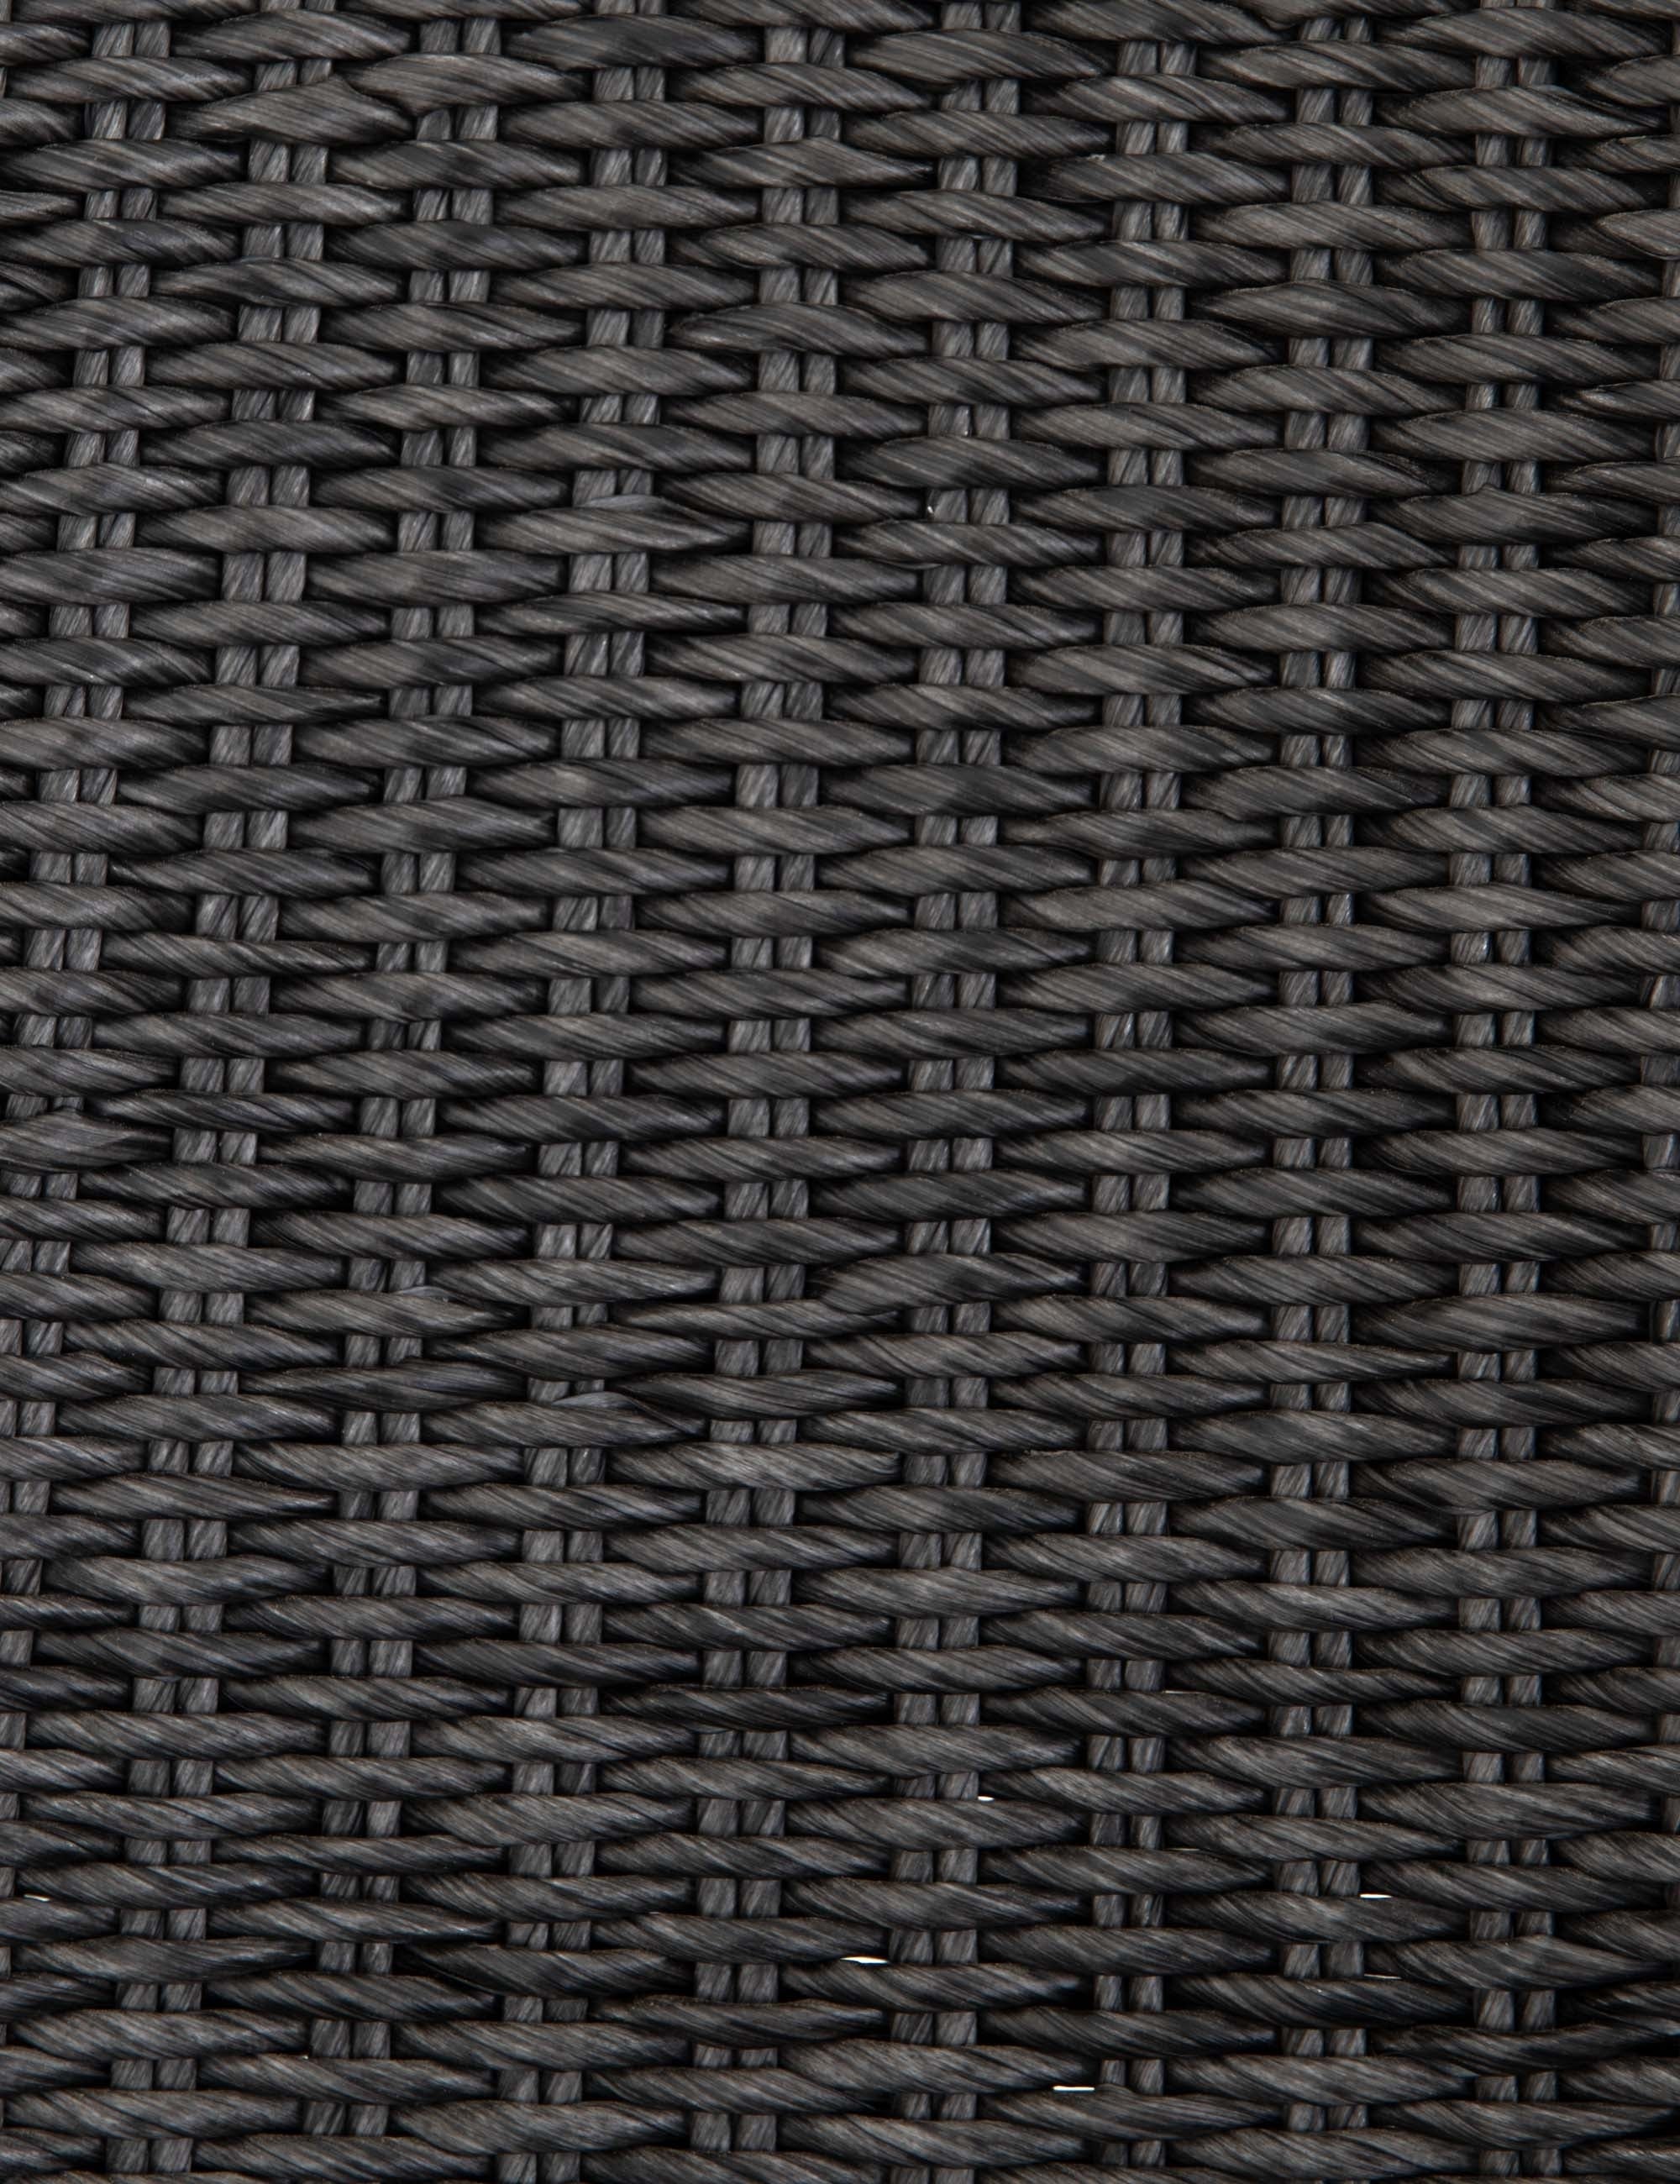 Detailed shot of the black woven wicker on the Manila wicker weave black indoor and outdoor dining chair